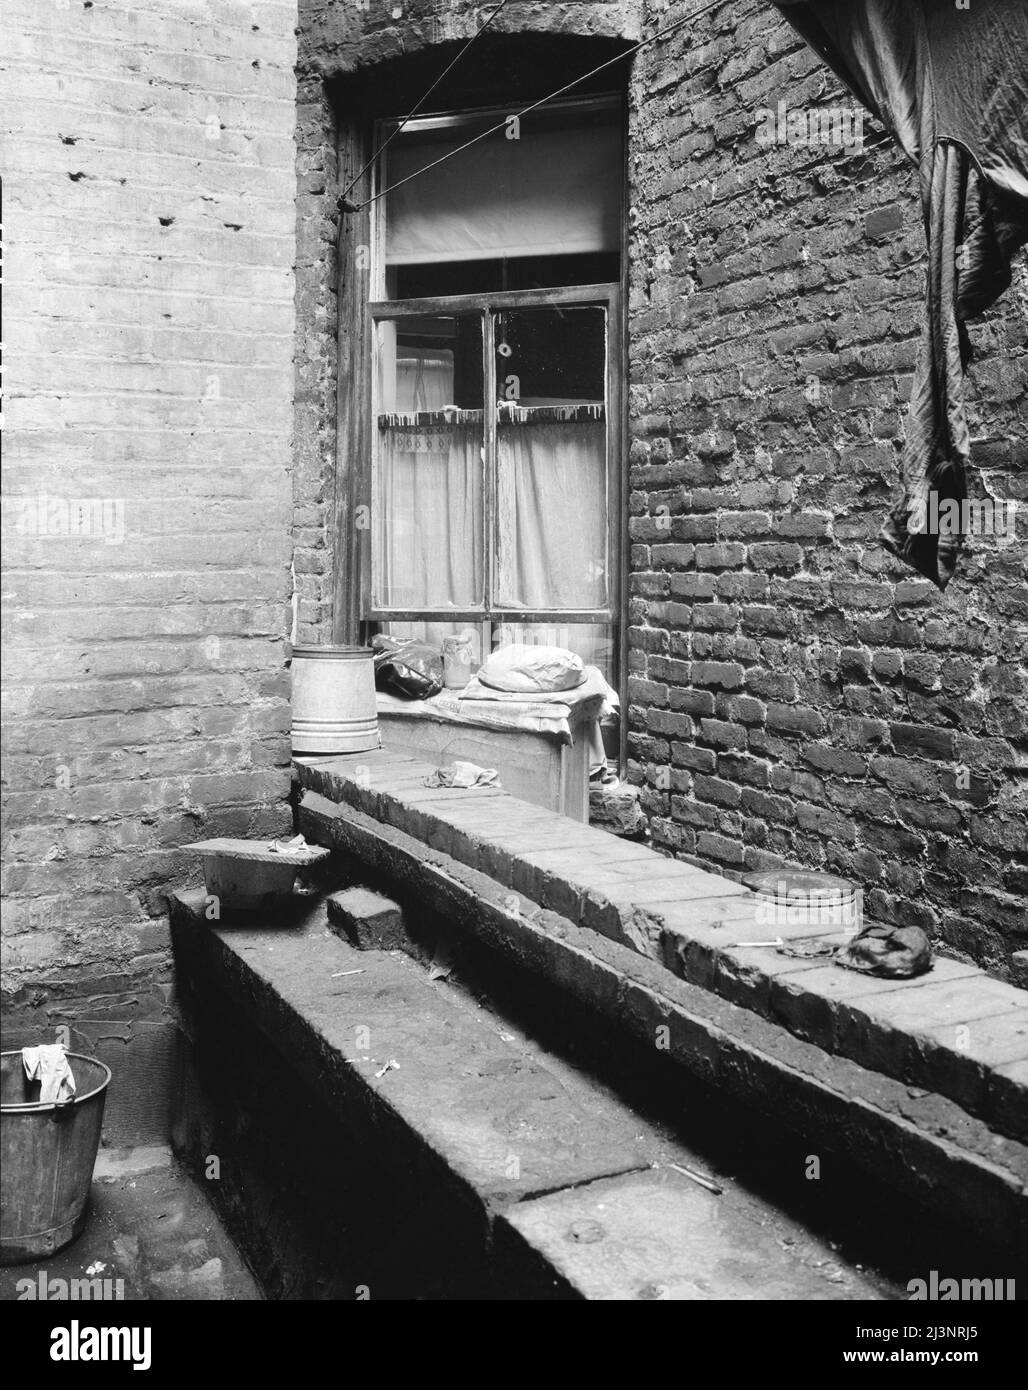 One of the rear windows, tenement dwelling of Mr. and Mrs. Jacob Solomon, 133 Aveue D, New York City. The Solomon family are on the accepted list for resettlement at Hightstown, New Jersey. Stock Photo